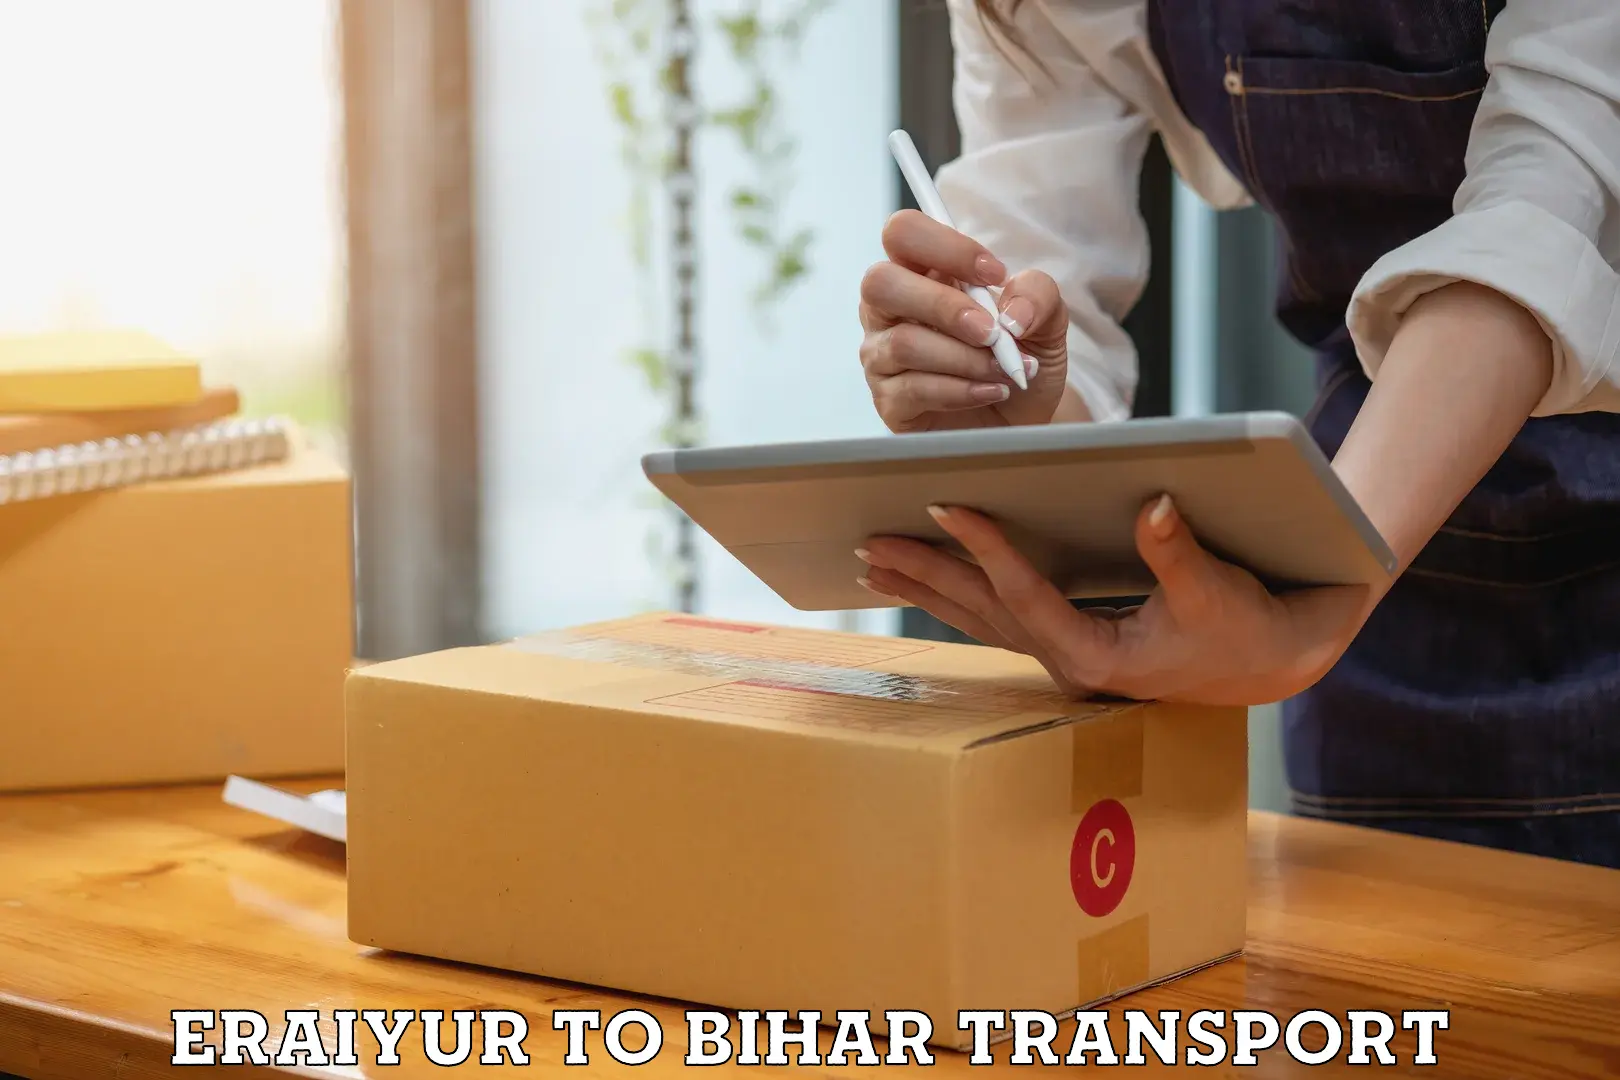 Delivery service Eraiyur to Bettiah